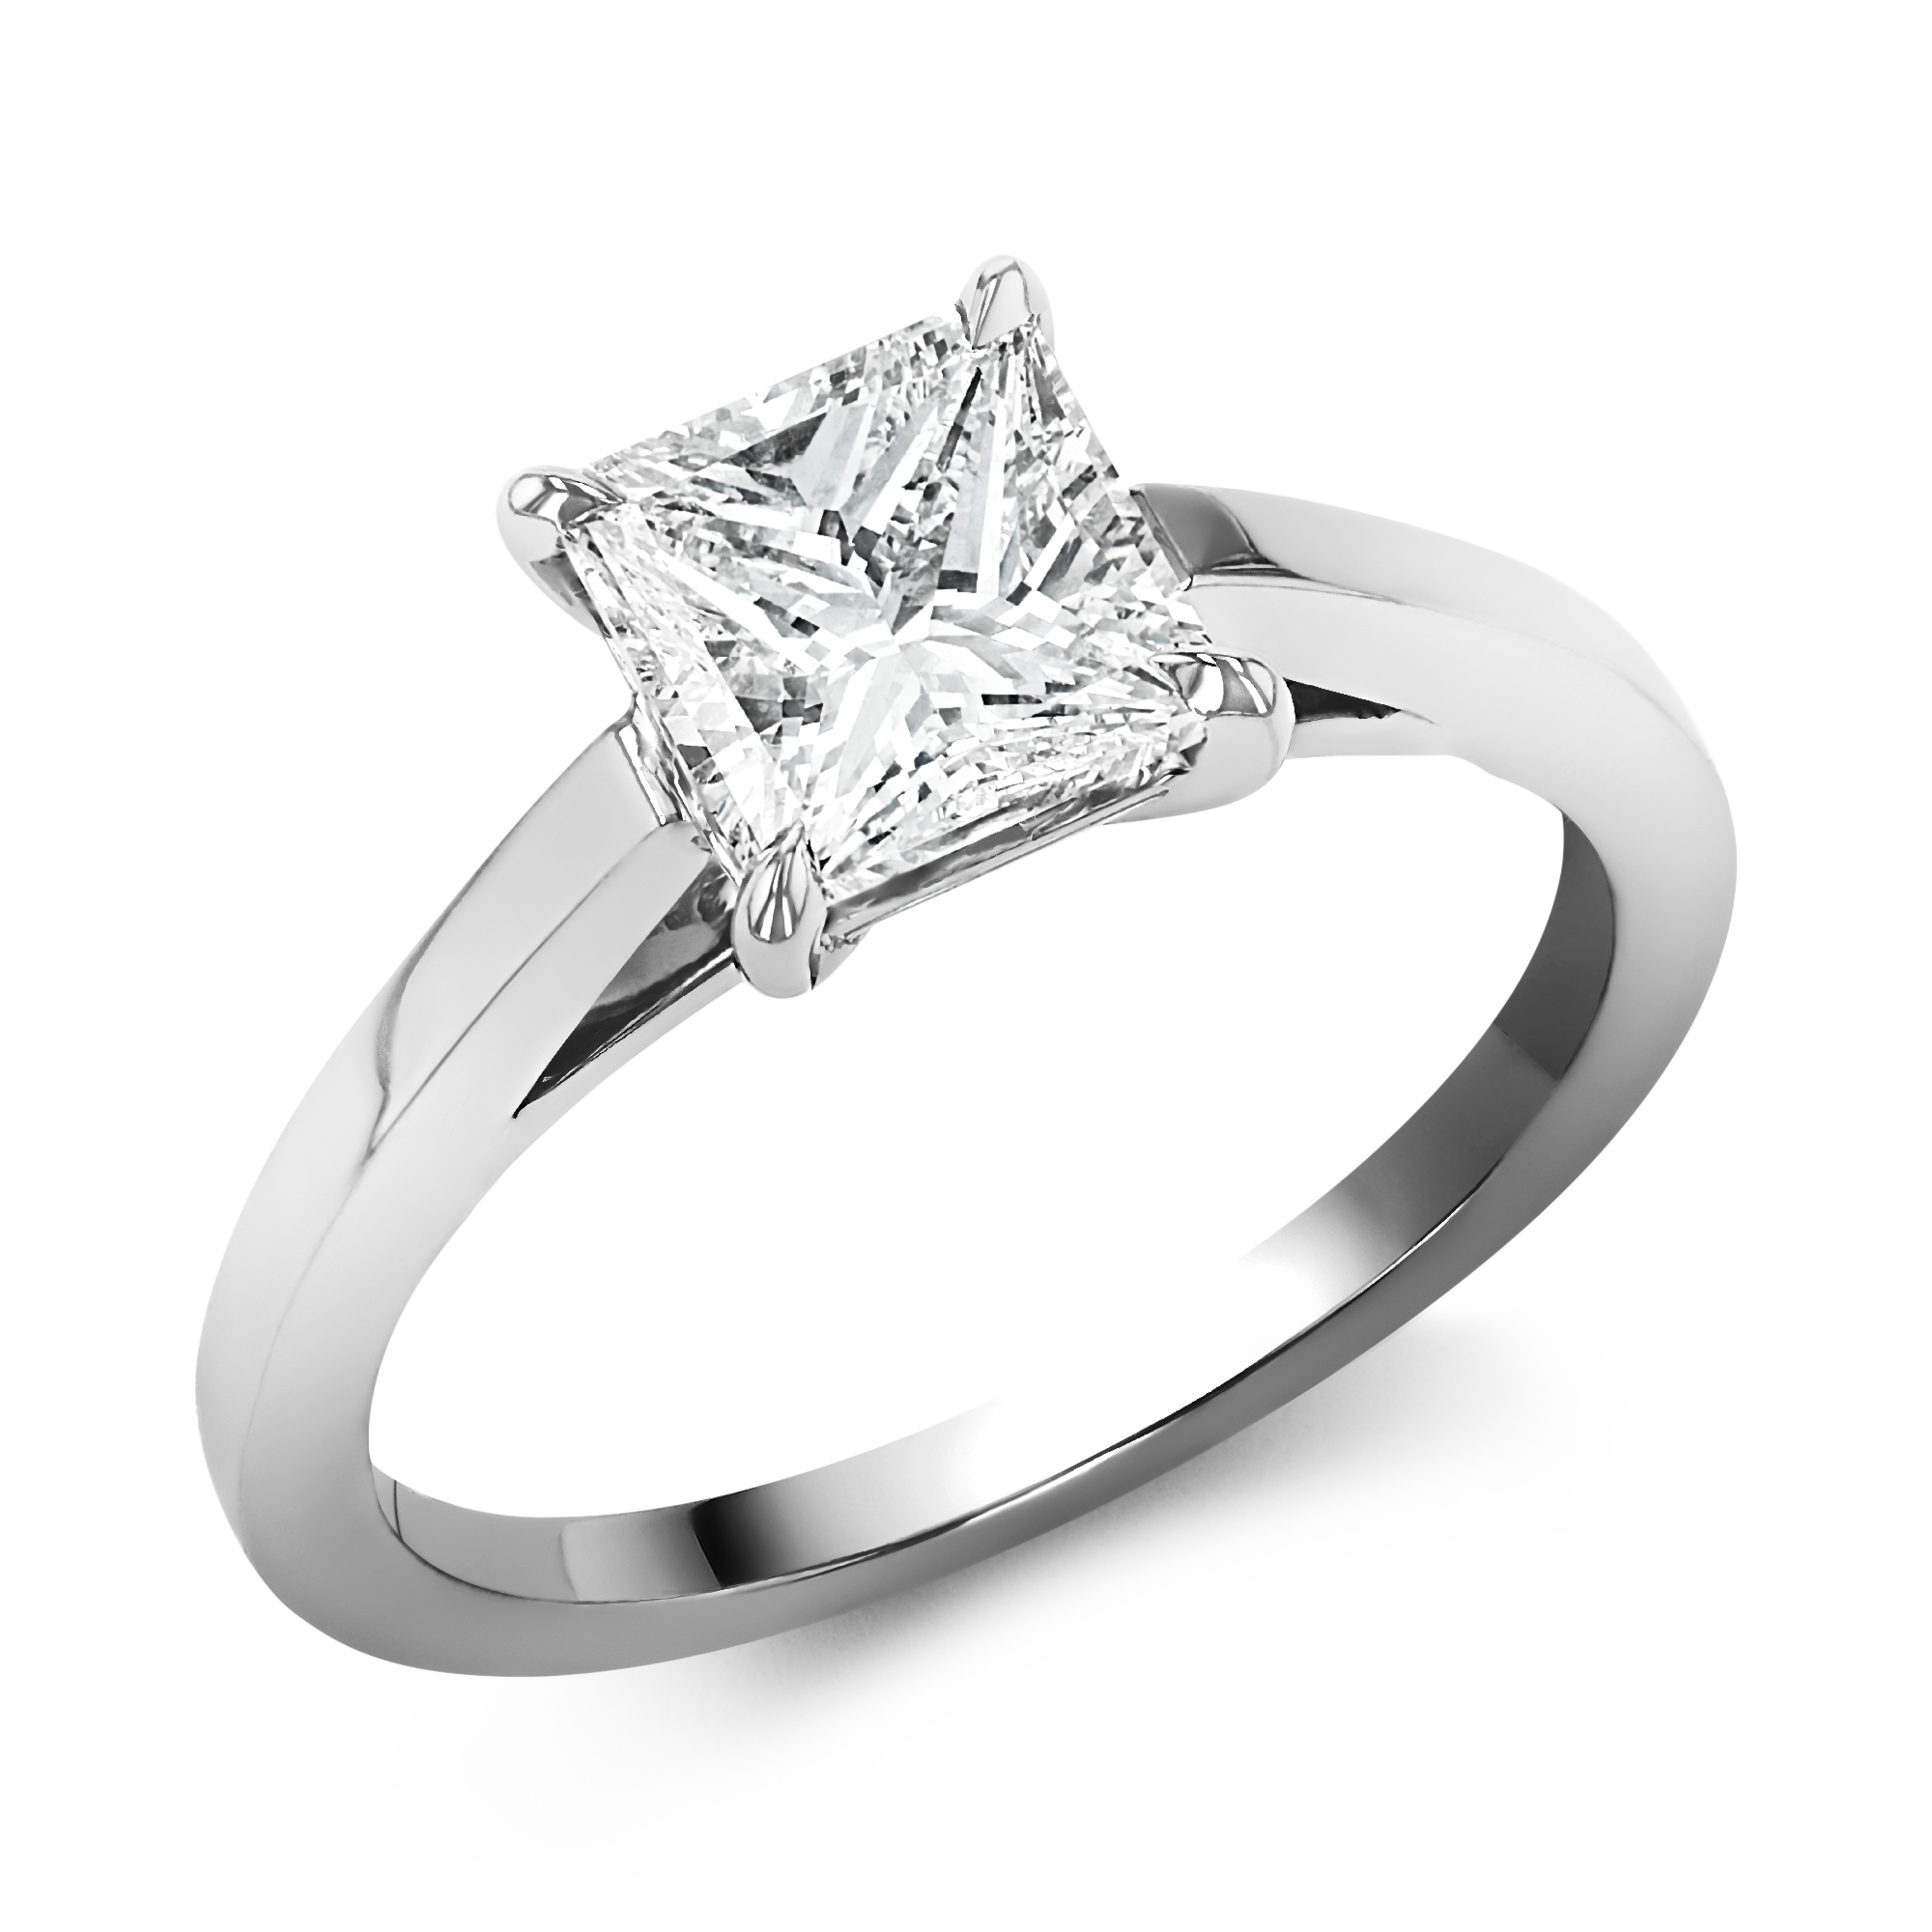 Classic 1.51ct Diamond Solitaire Ring Princess Cut, Claw Set_1